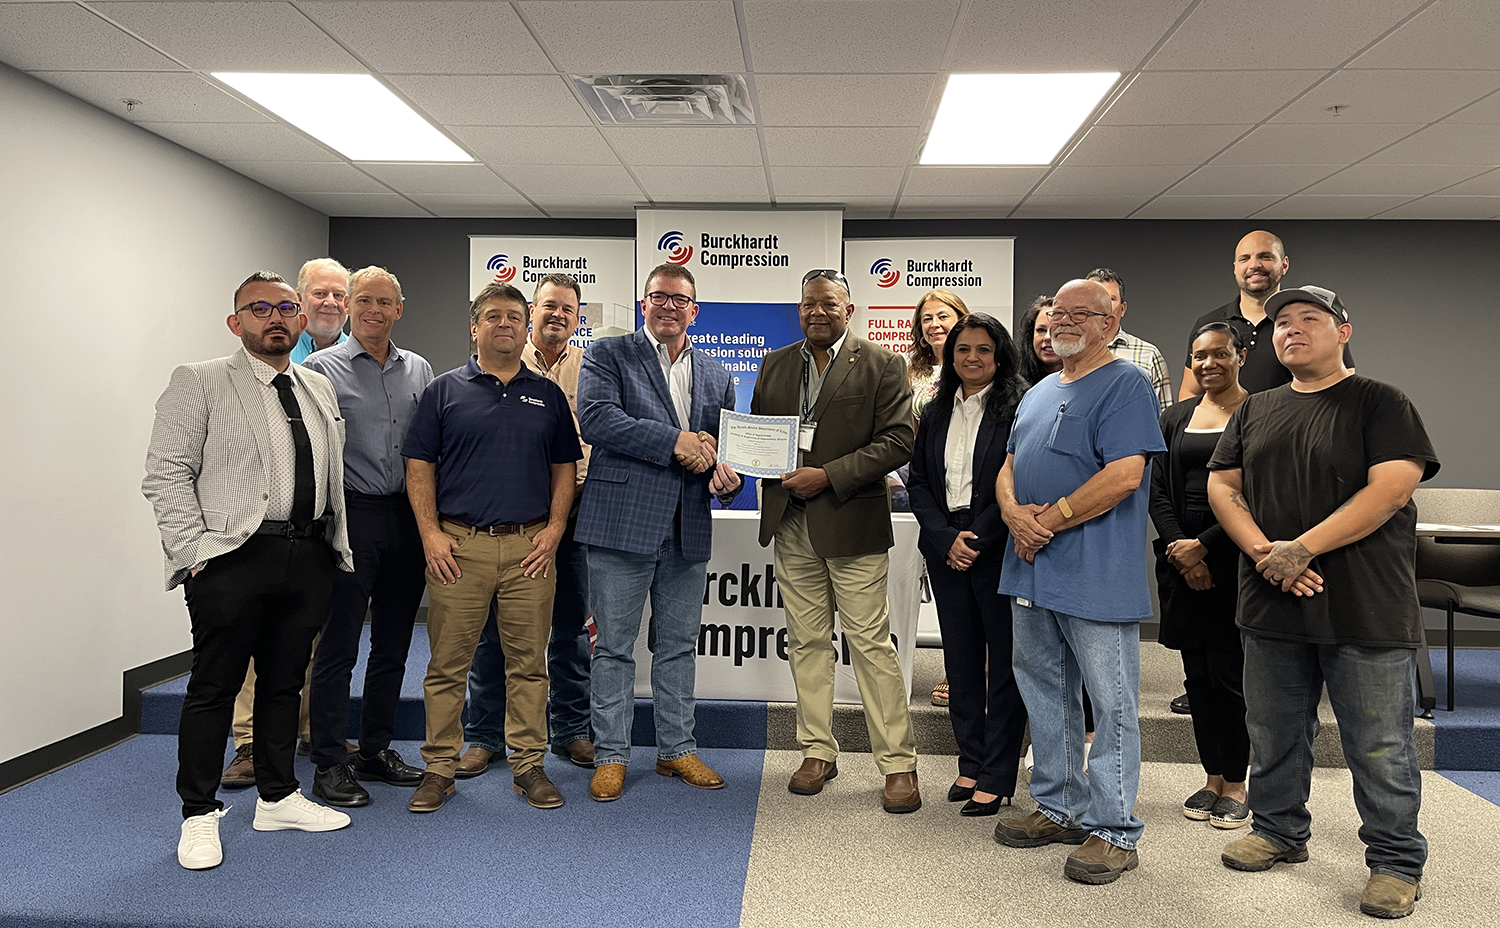 Burckhardt Compression (US) Inc. has received an exclusive Certificate of Apprenticeship from the U.S. Department of Labor to train and certify Laby® Compressor Technicians.